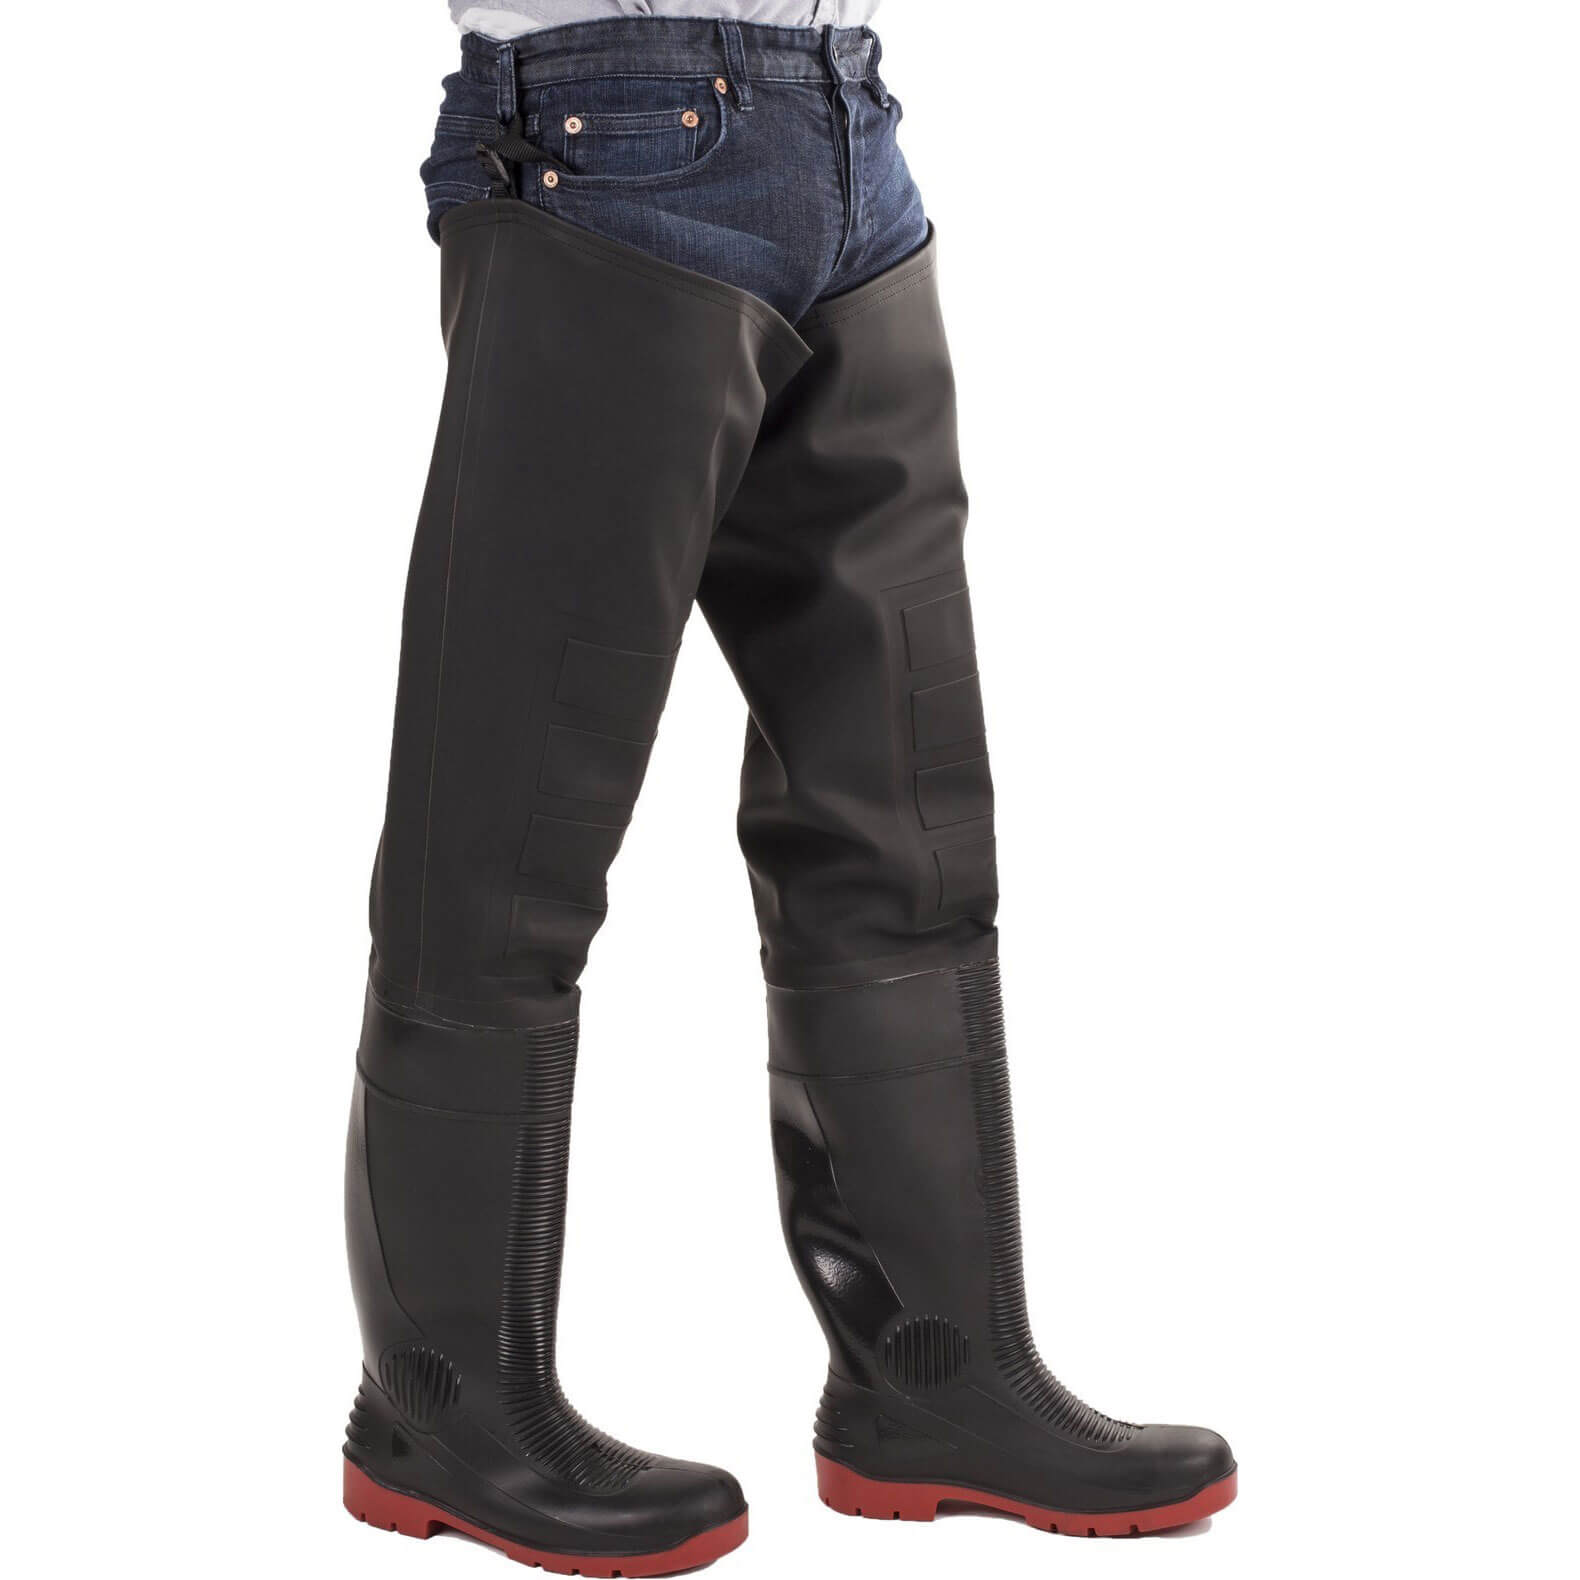 Image of Amblers Safety Rhone Thigh Safety Wader Black / Red Size 8